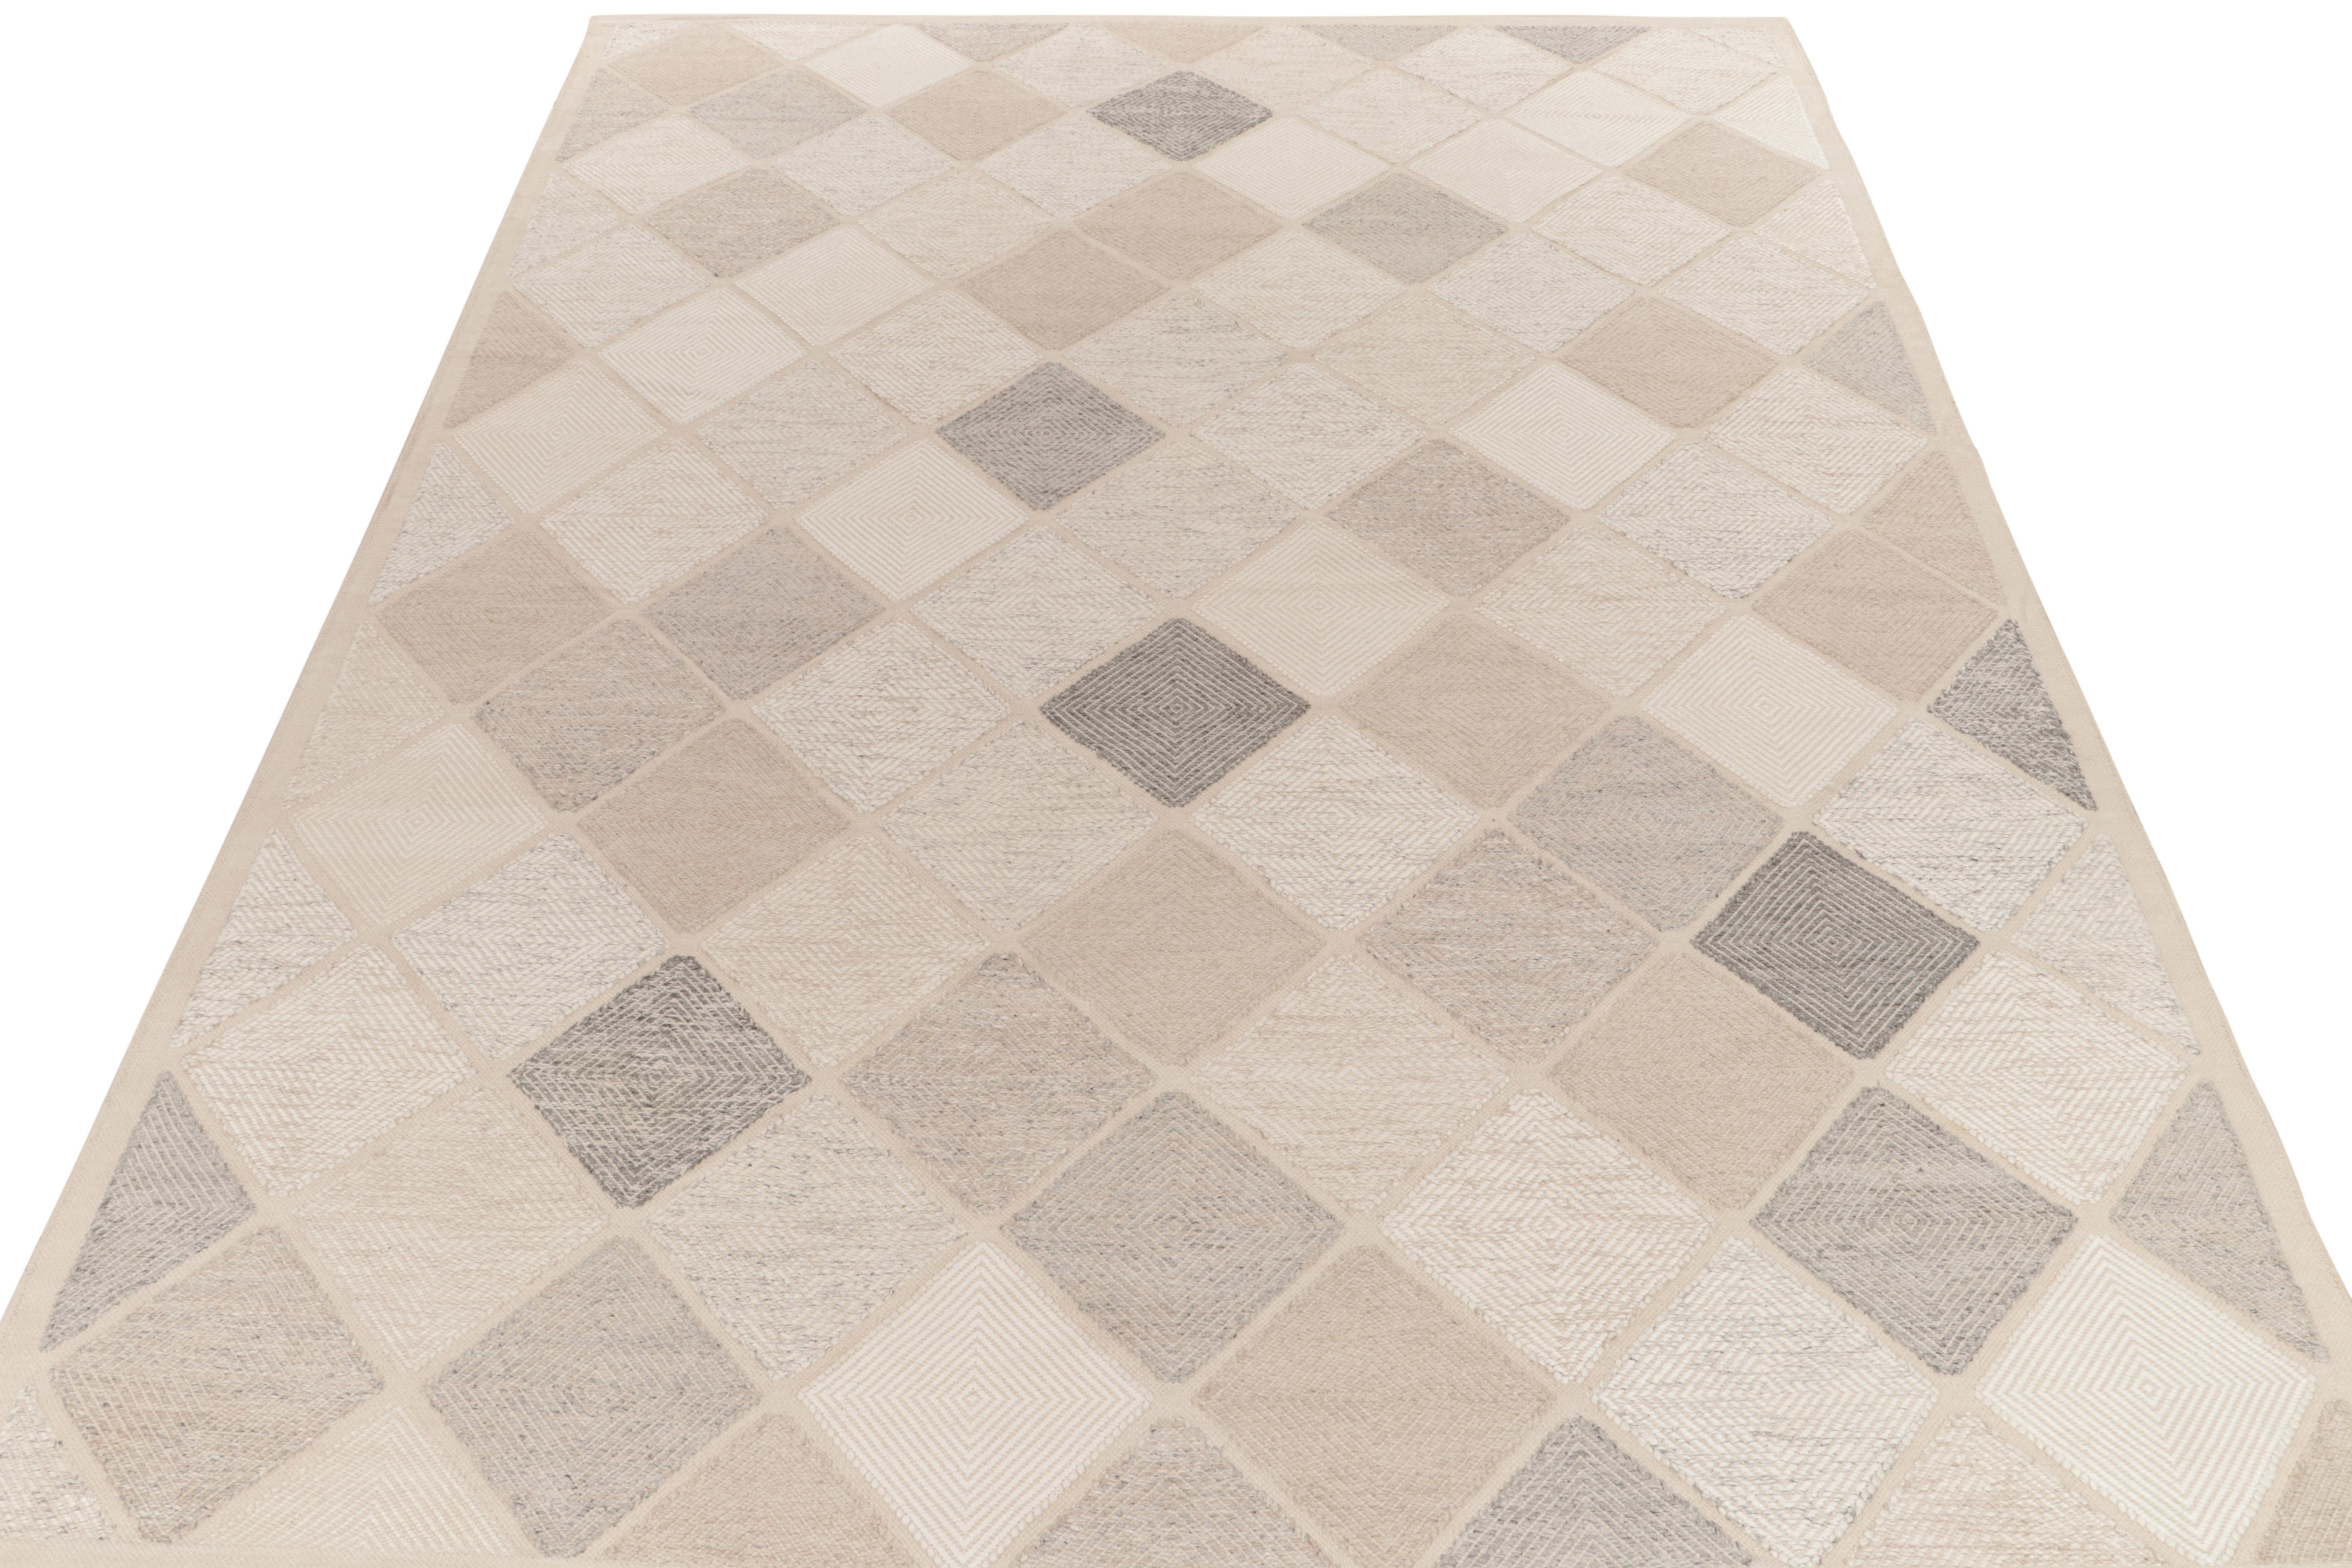 Rug & Kilim presents this exquisite 11x14 Scandinavian kilim from the Morocco line of the award-winning flat weave texture. The handwoven piece flows in an all over half diamond pattern in a delightful blend of beige, stone blue, grey & white. The